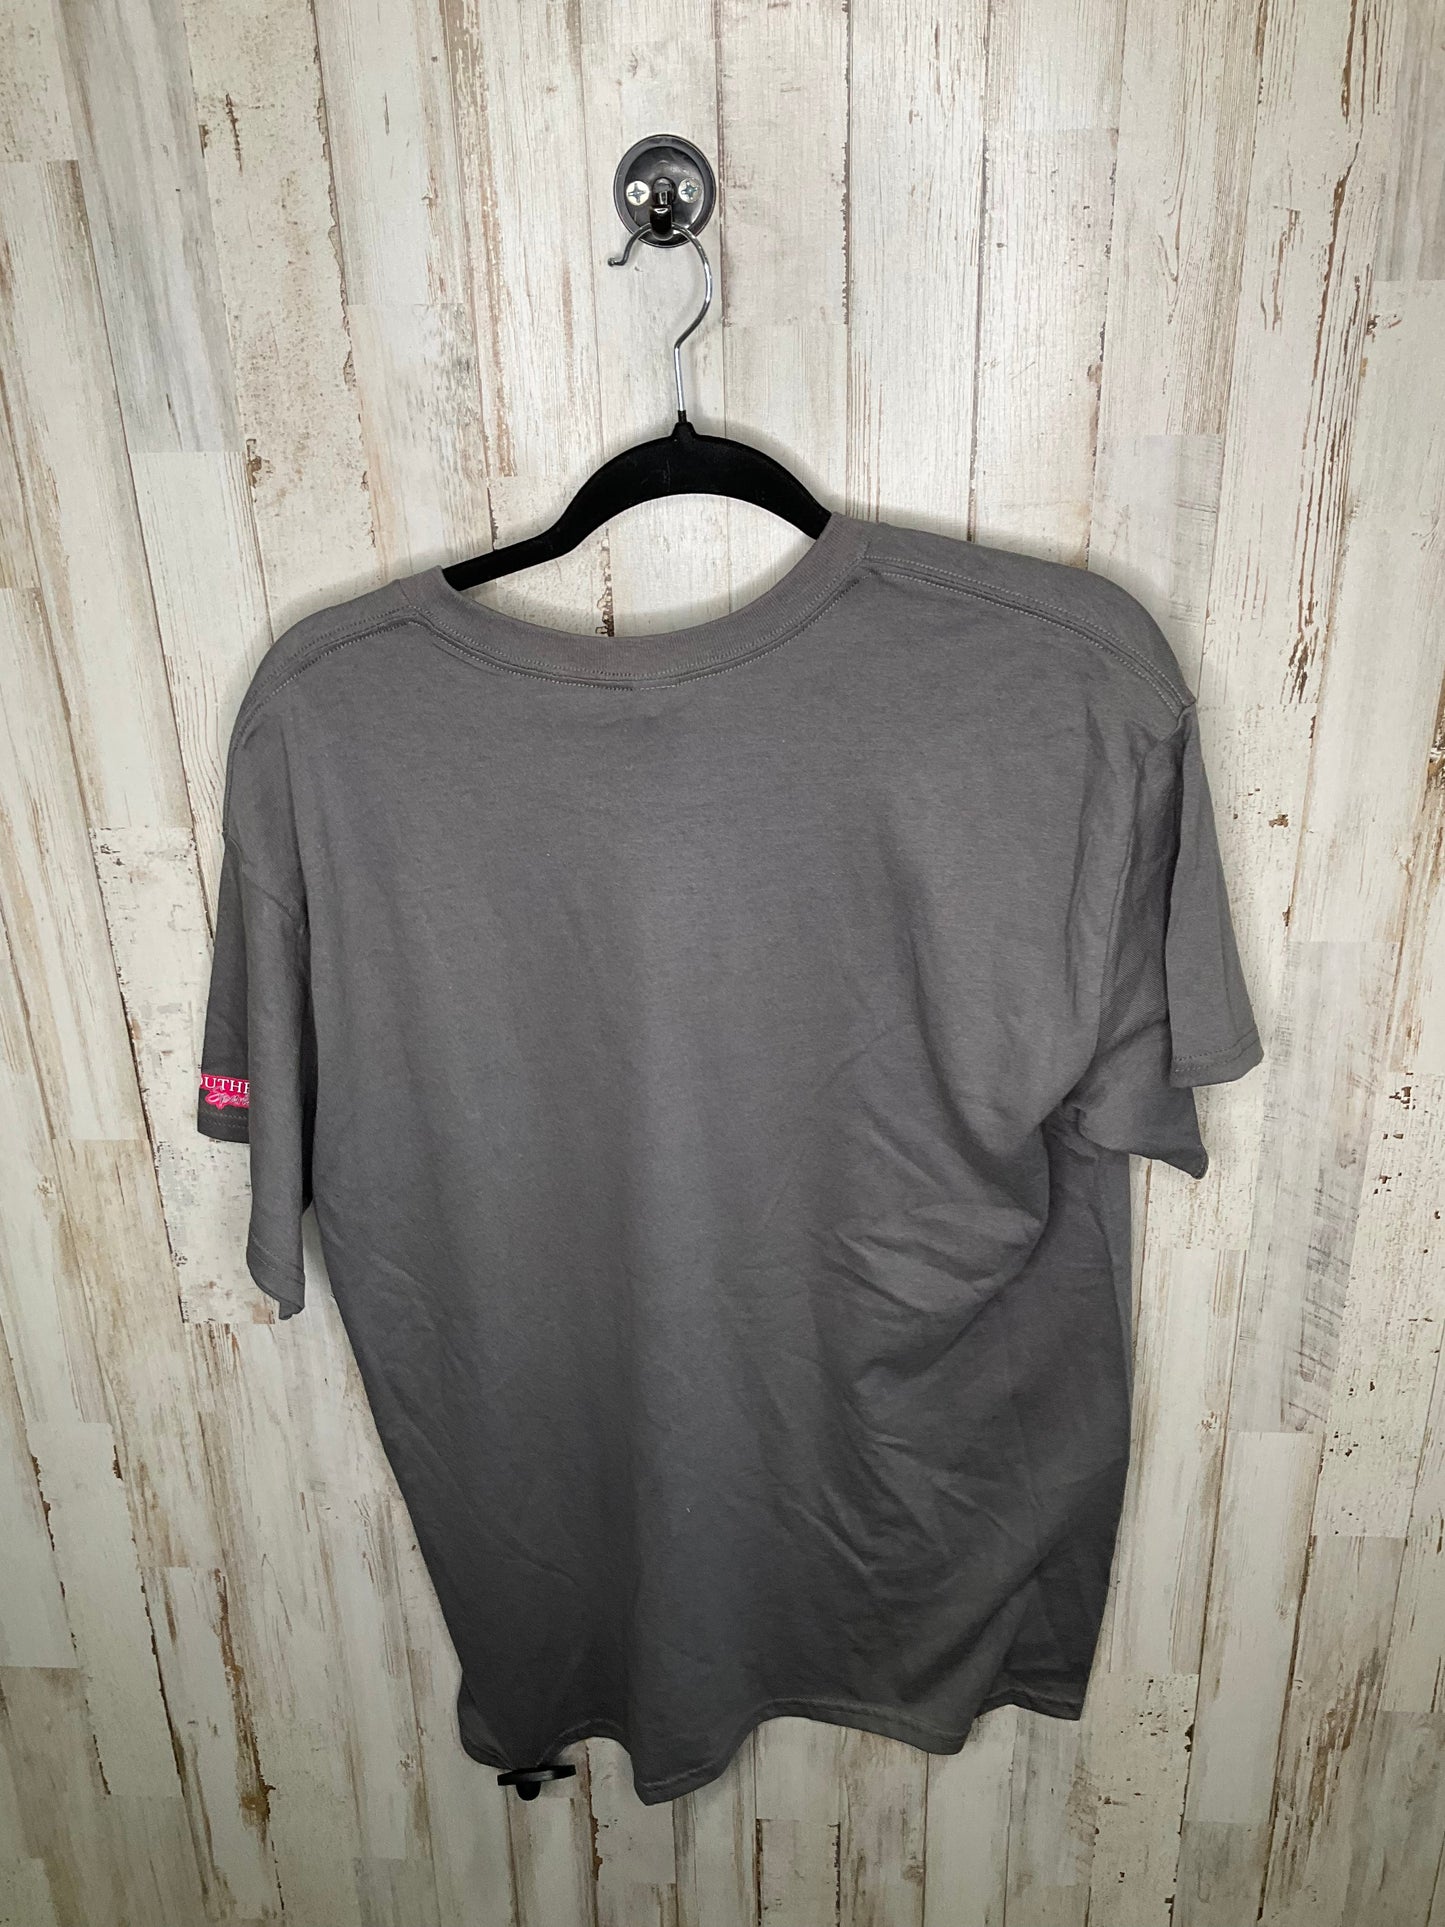 Grey Top Short Sleeve Clothes Mentor, Size L